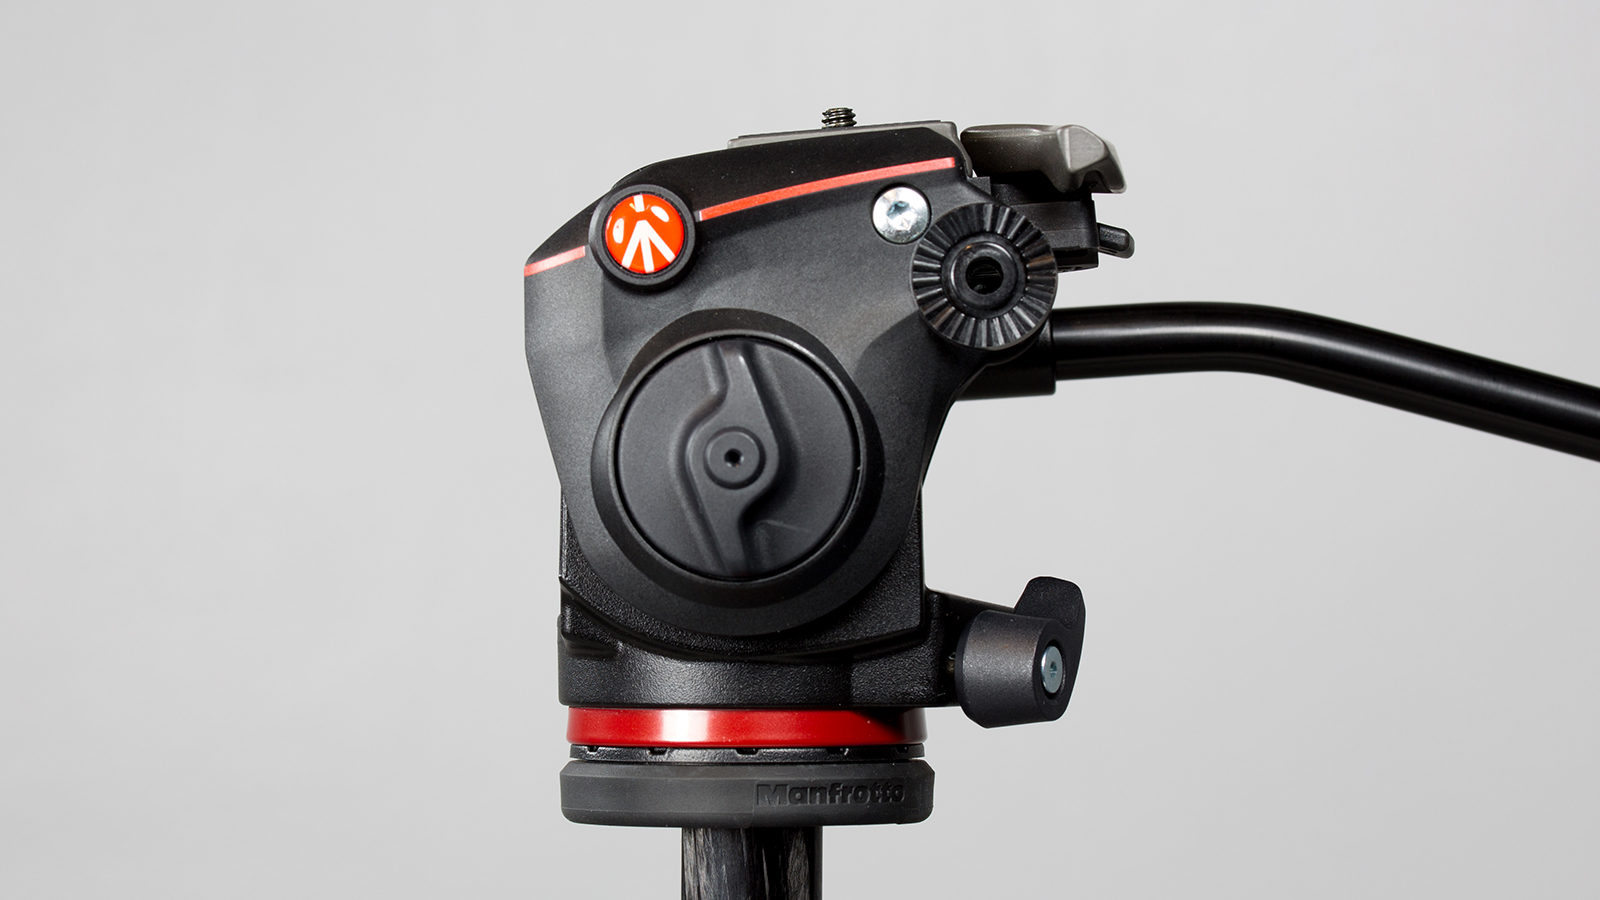 Manfrotto-MHXPRO-2W-DT-005-lukustus